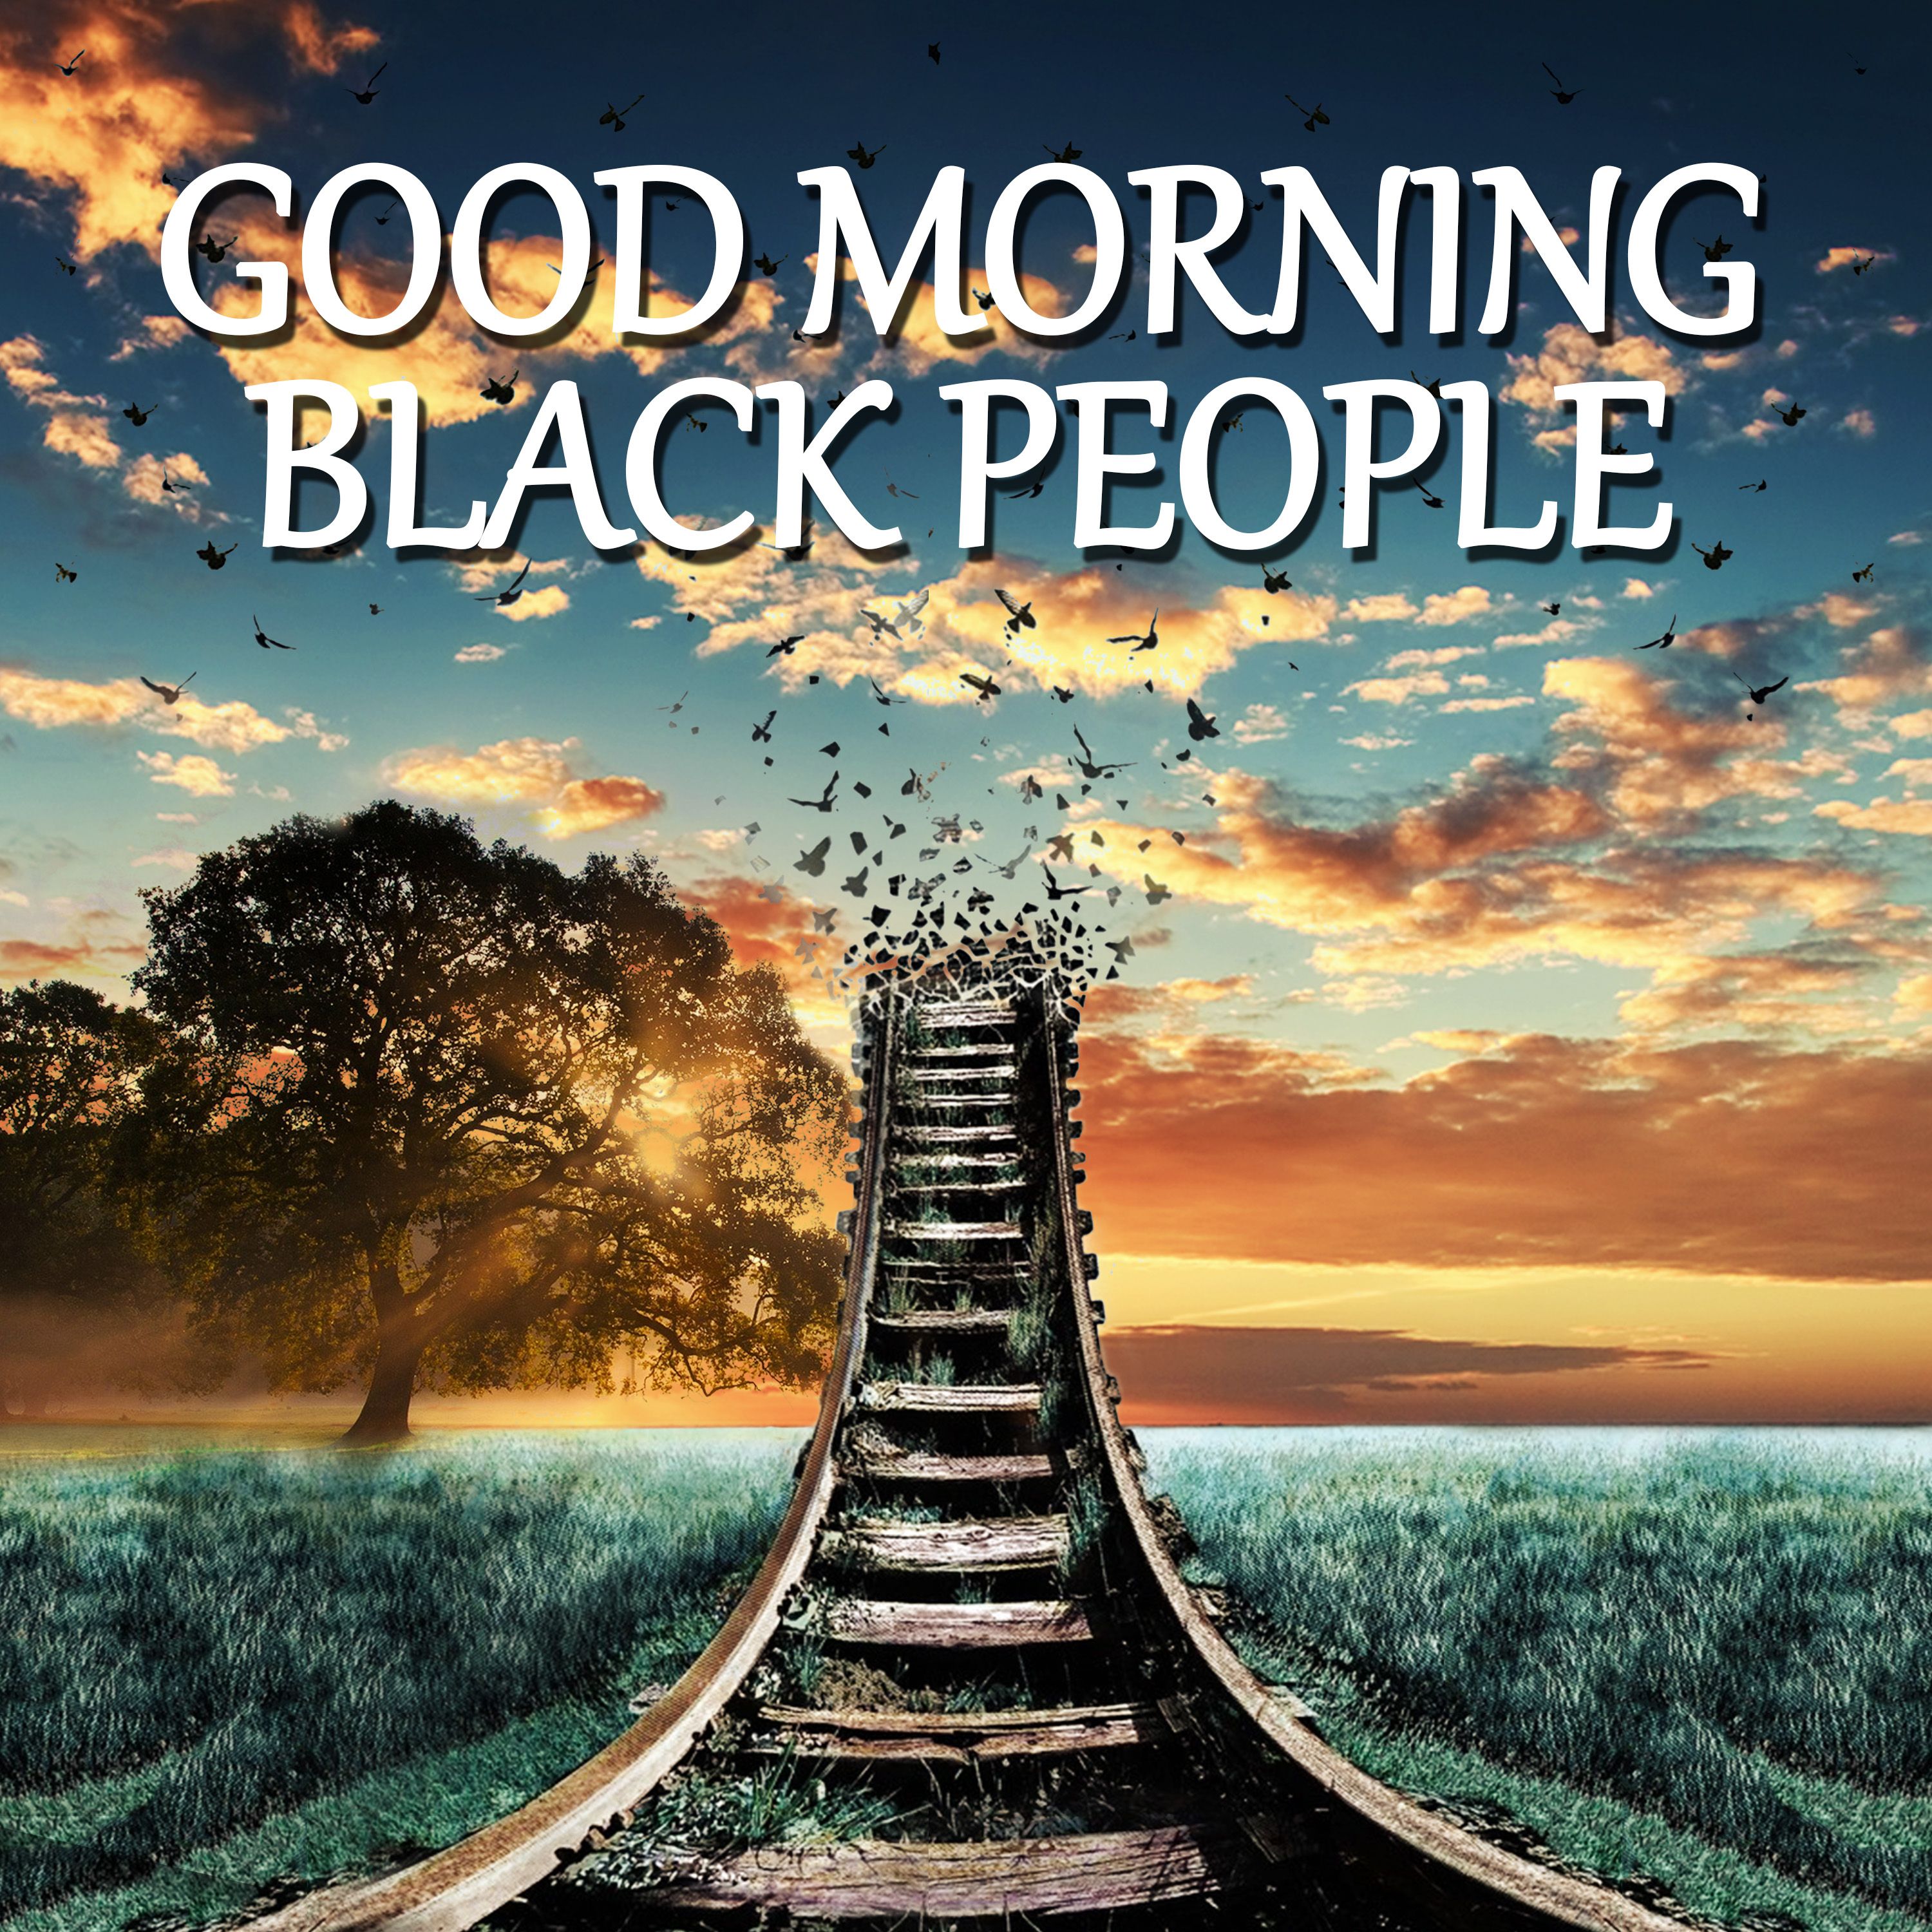 Collection 95+ Images black person good morning african american images Latest